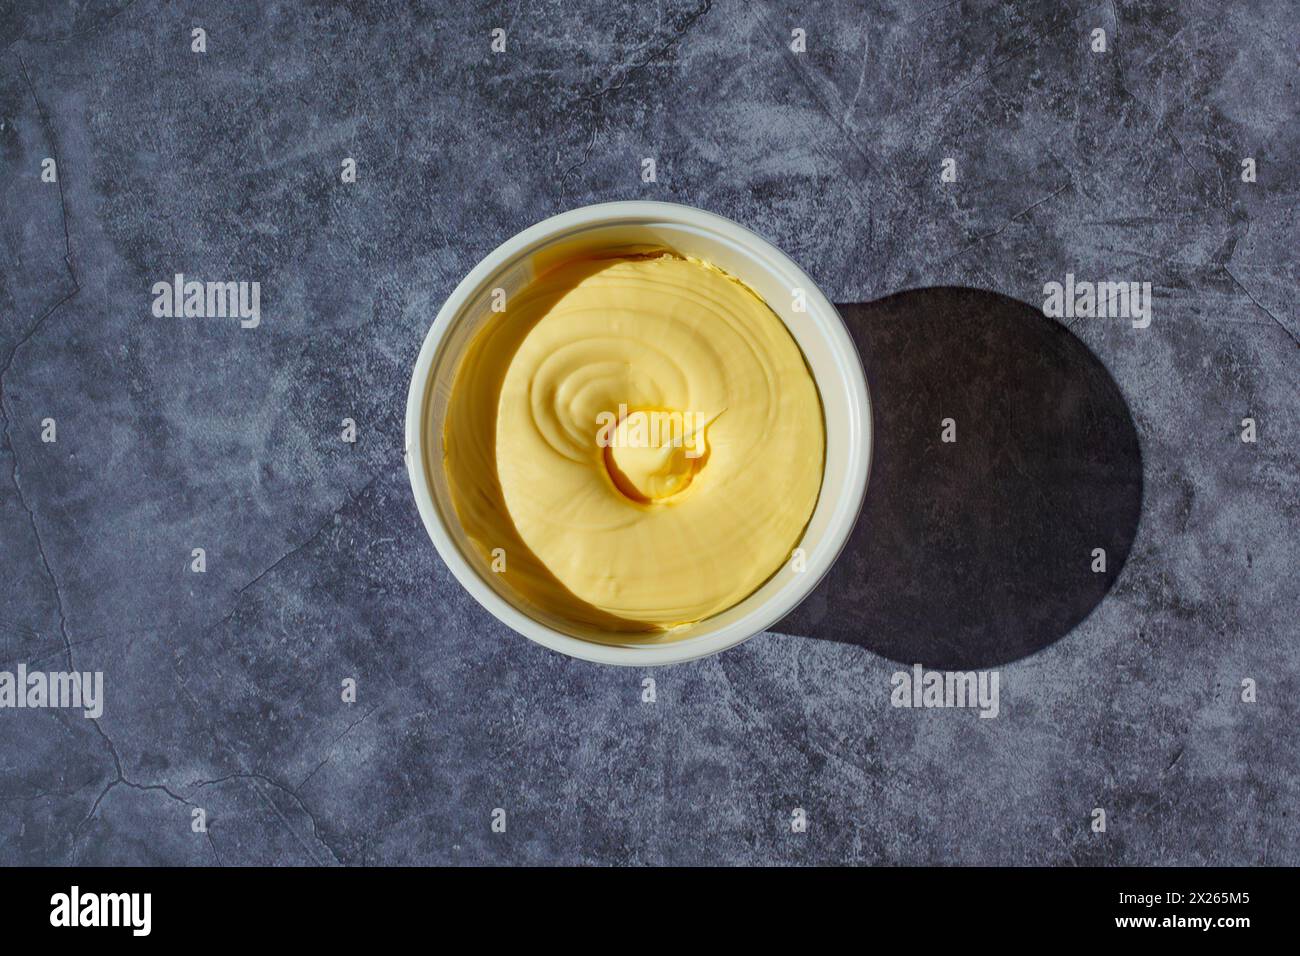 Overhead shot of a tub of margarine Stock Photo